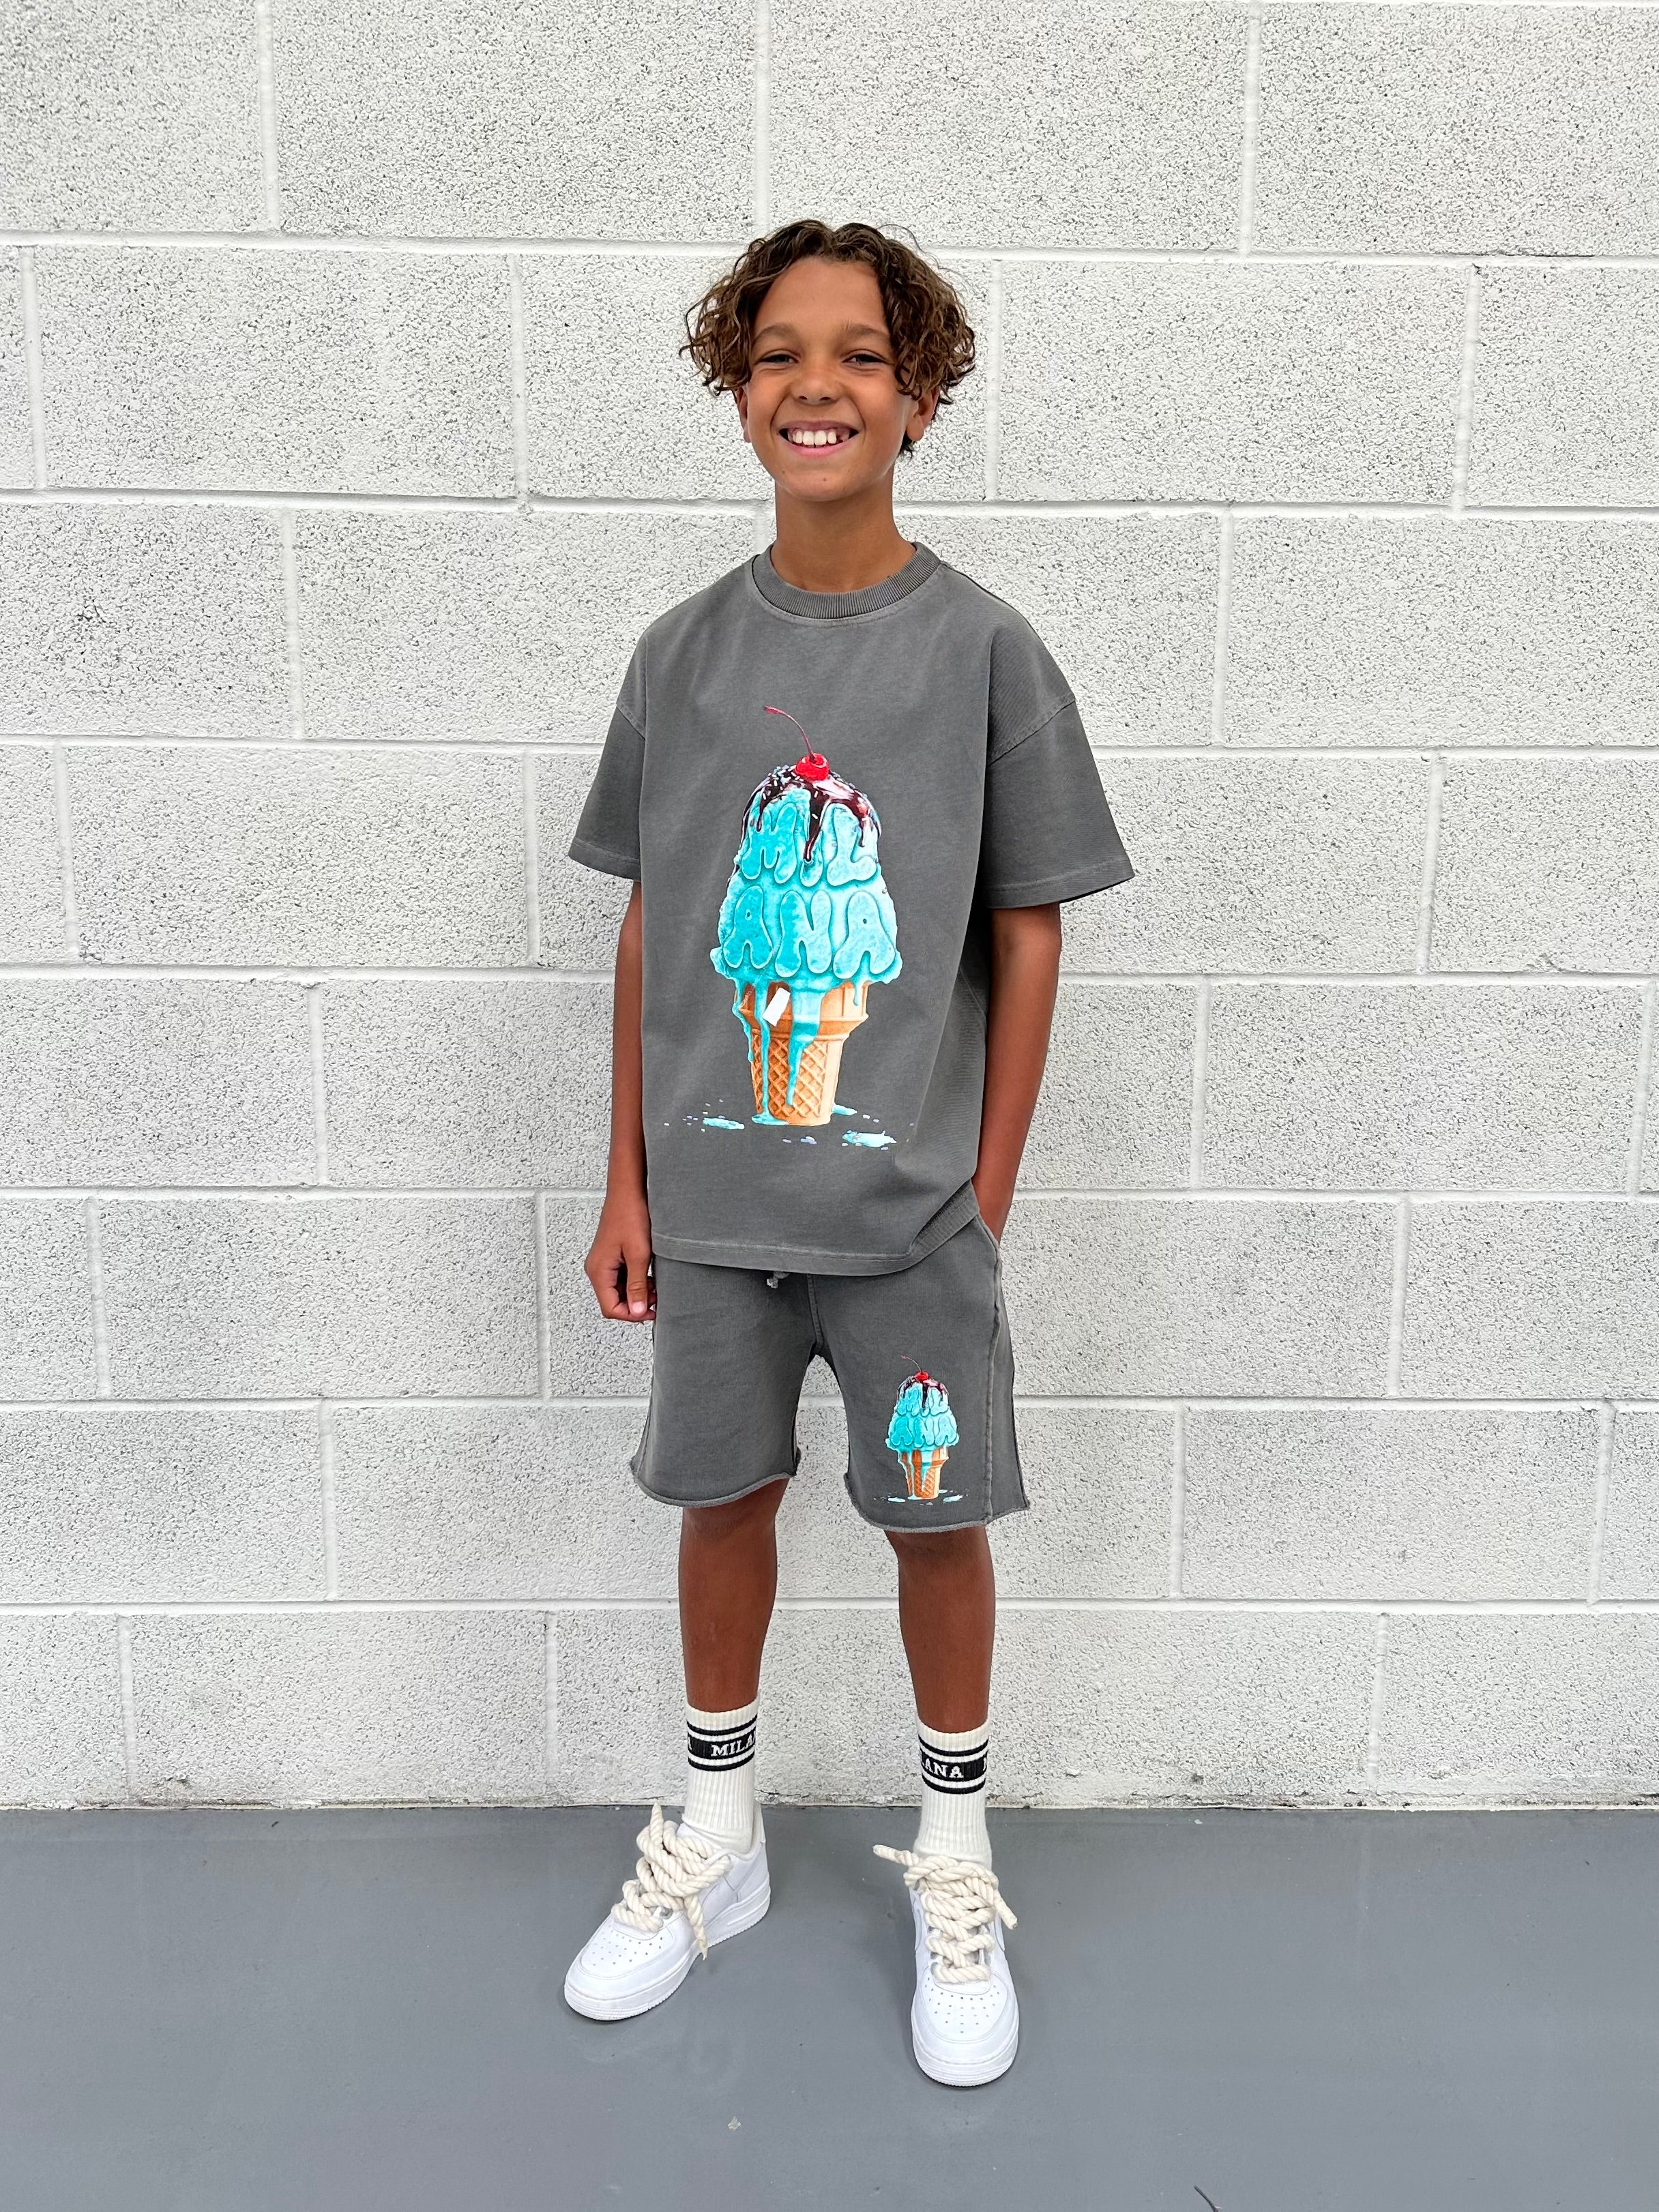 Washed Charcoal Ice Cream Kids T-shirt.